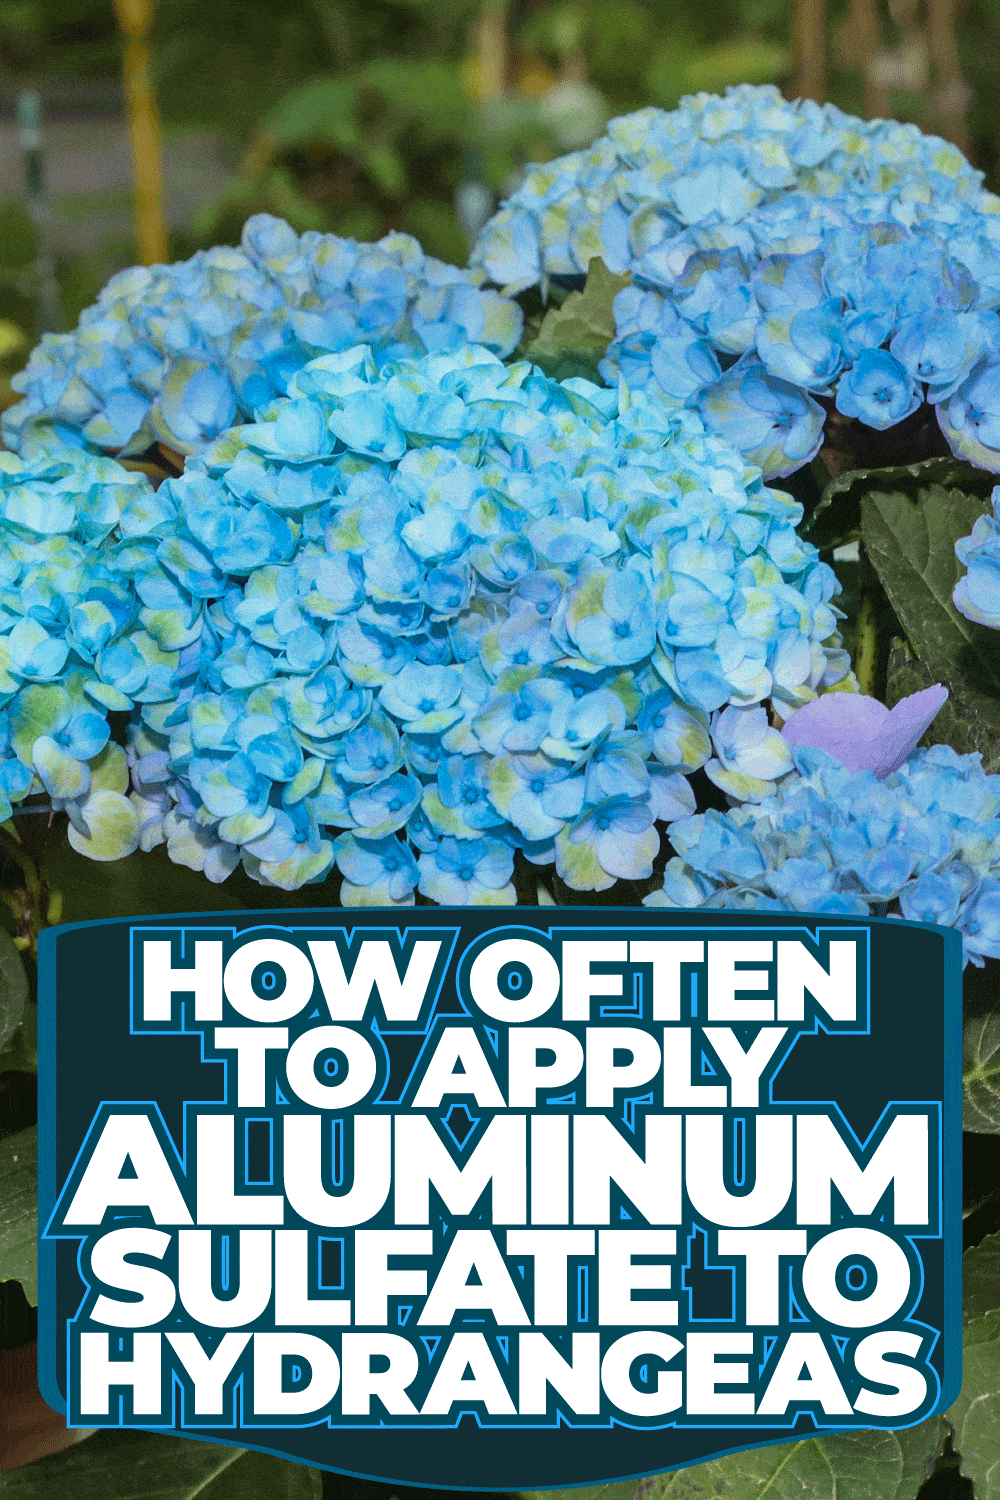 How Often To Apply Aluminum Sulfate To Hydrangeas [And How To]